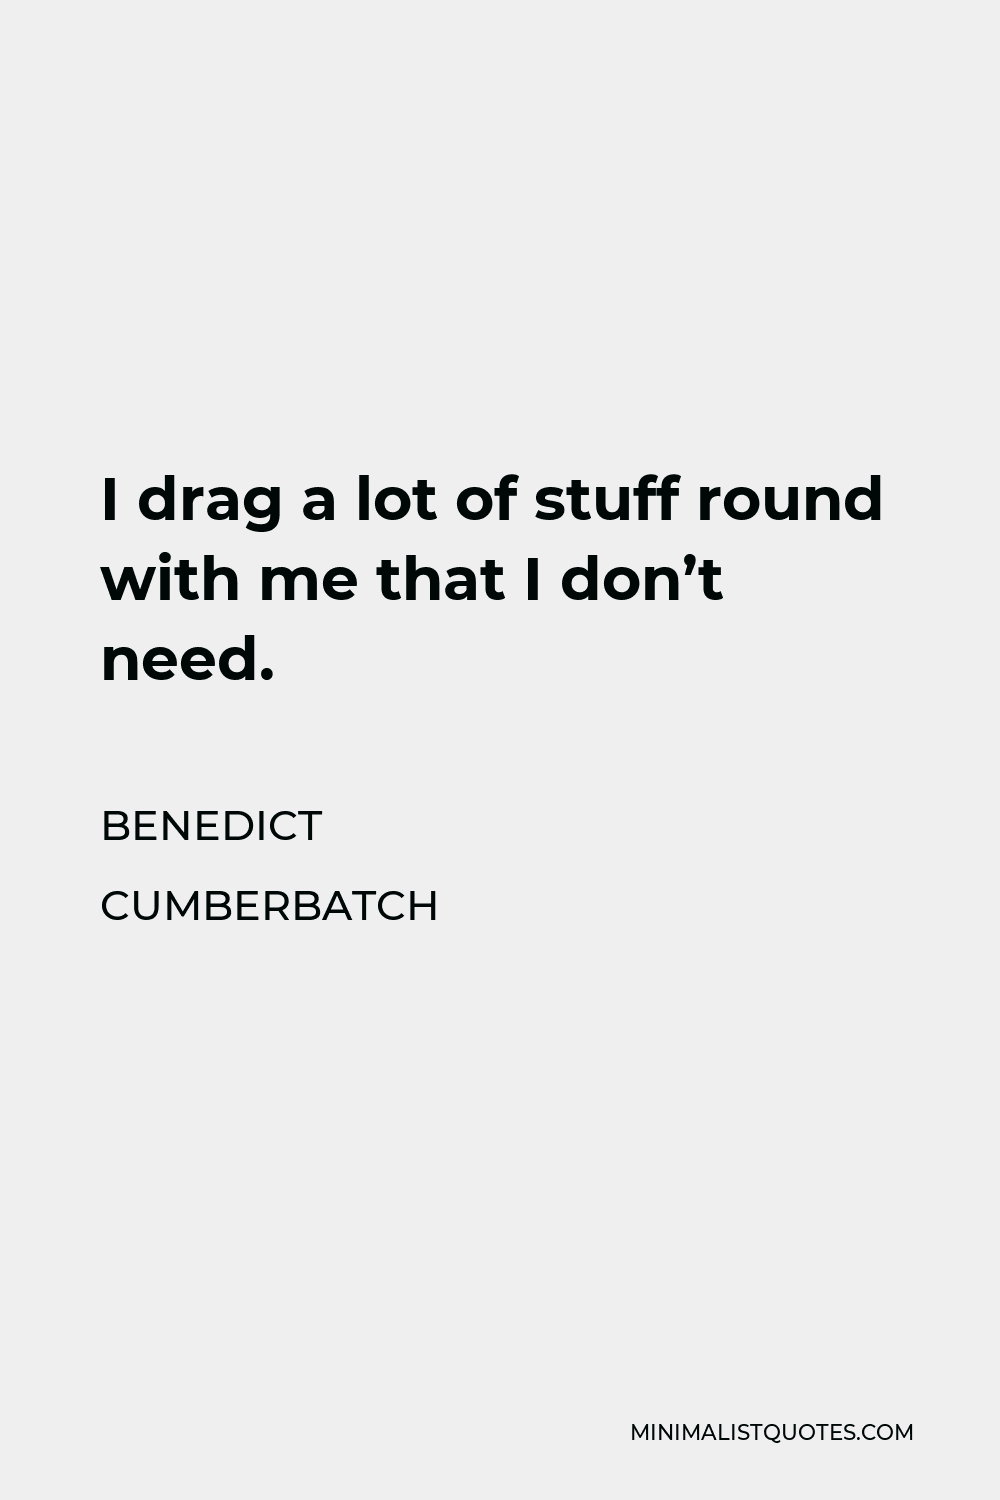 Benedict Cumberbatch Quote - I drag a lot of stuff round with me that I don’t need.